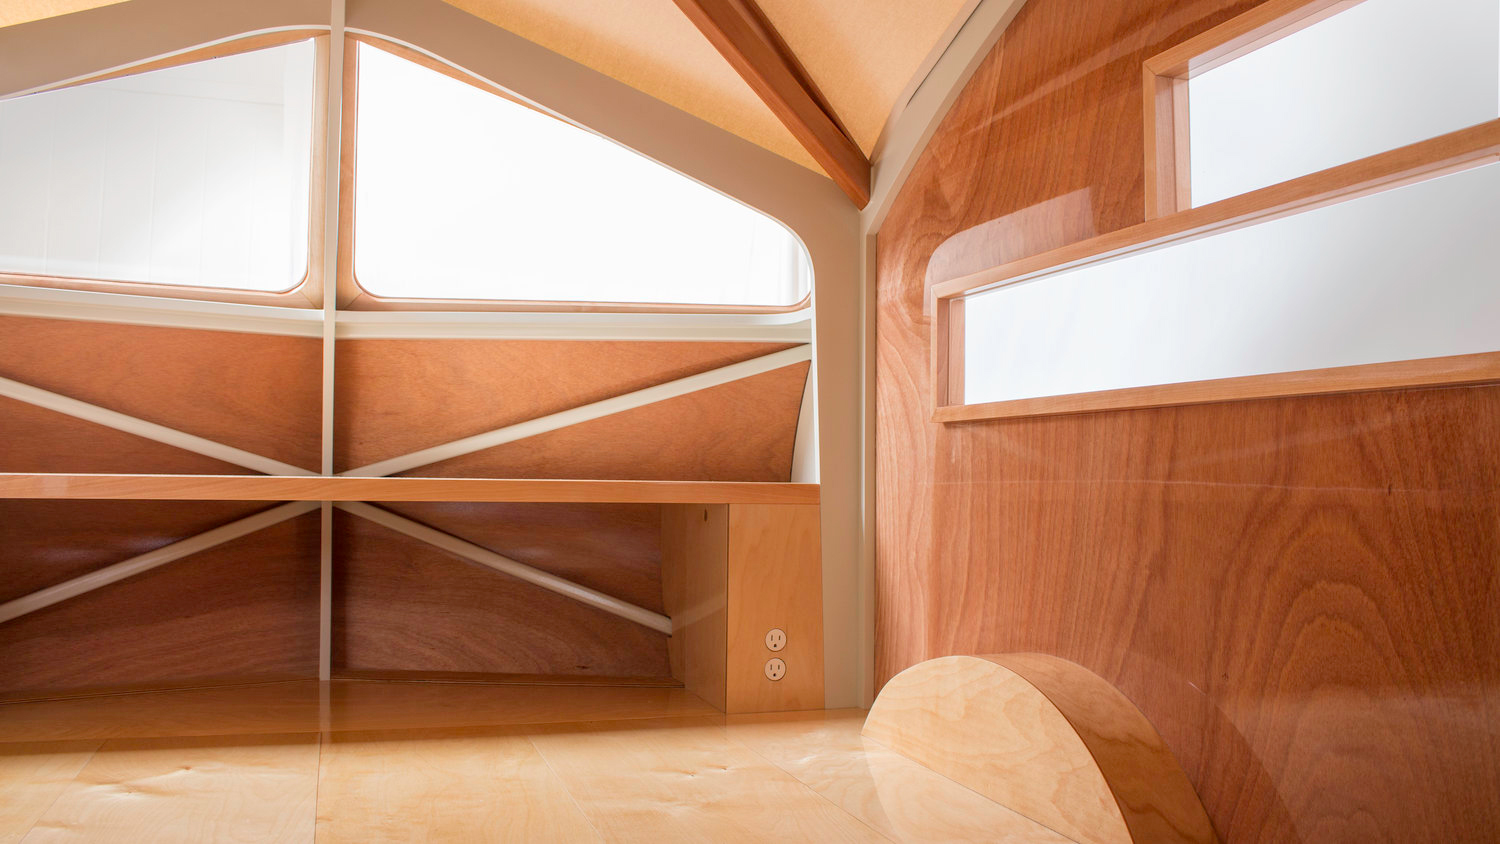 5 must-have trailers for life on the open road: the midcentury-inspired Hütte Hut